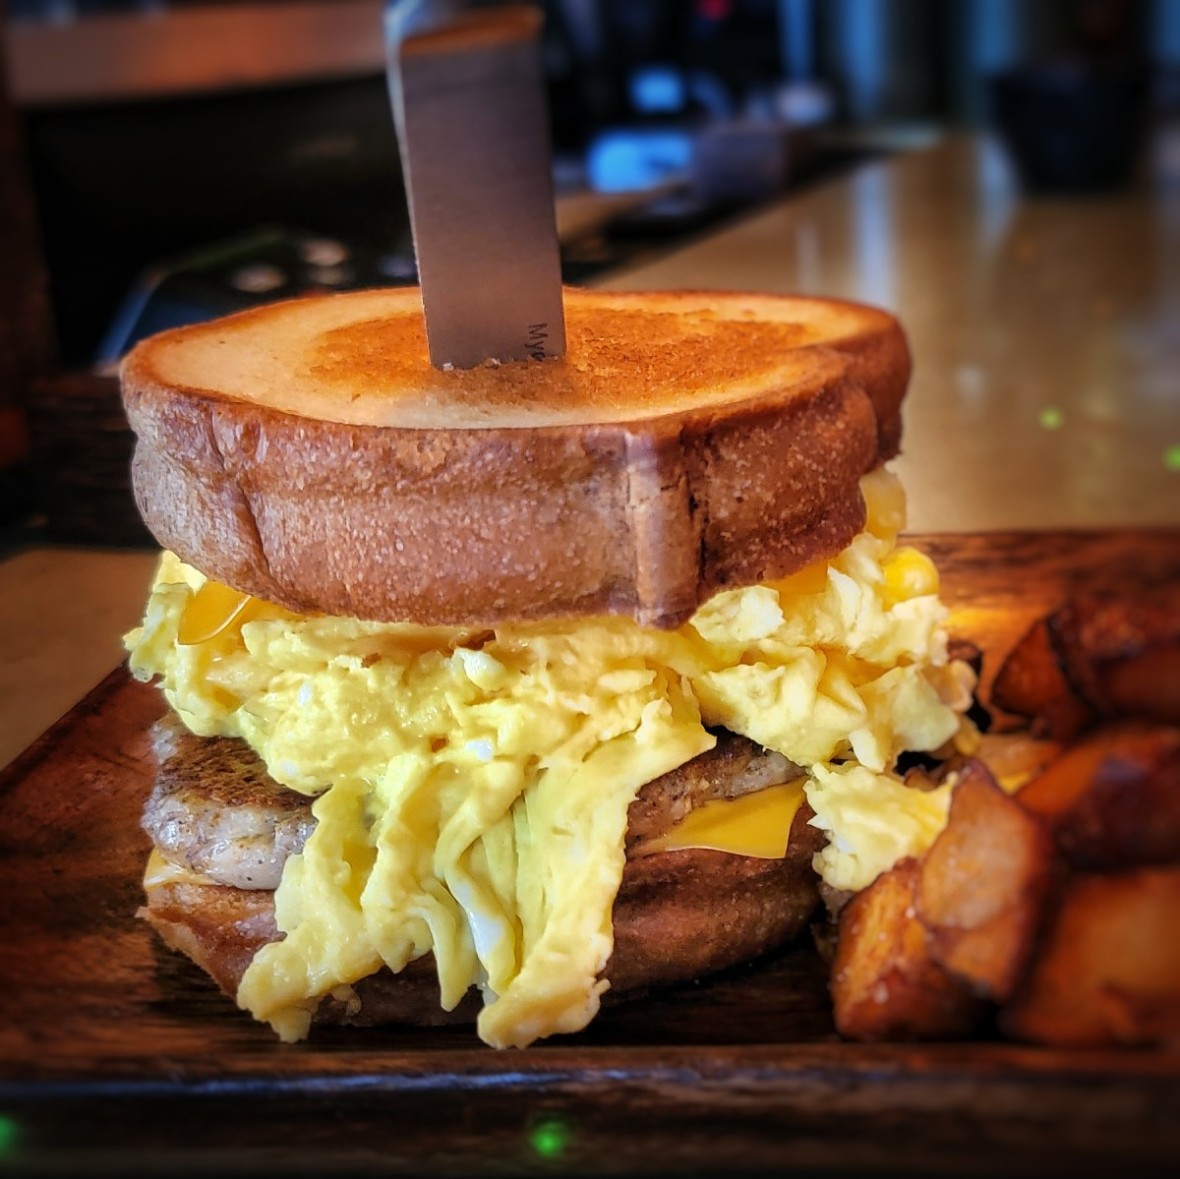 House made sausage egg and cheese on brioche toast from Ovelia Psistaria